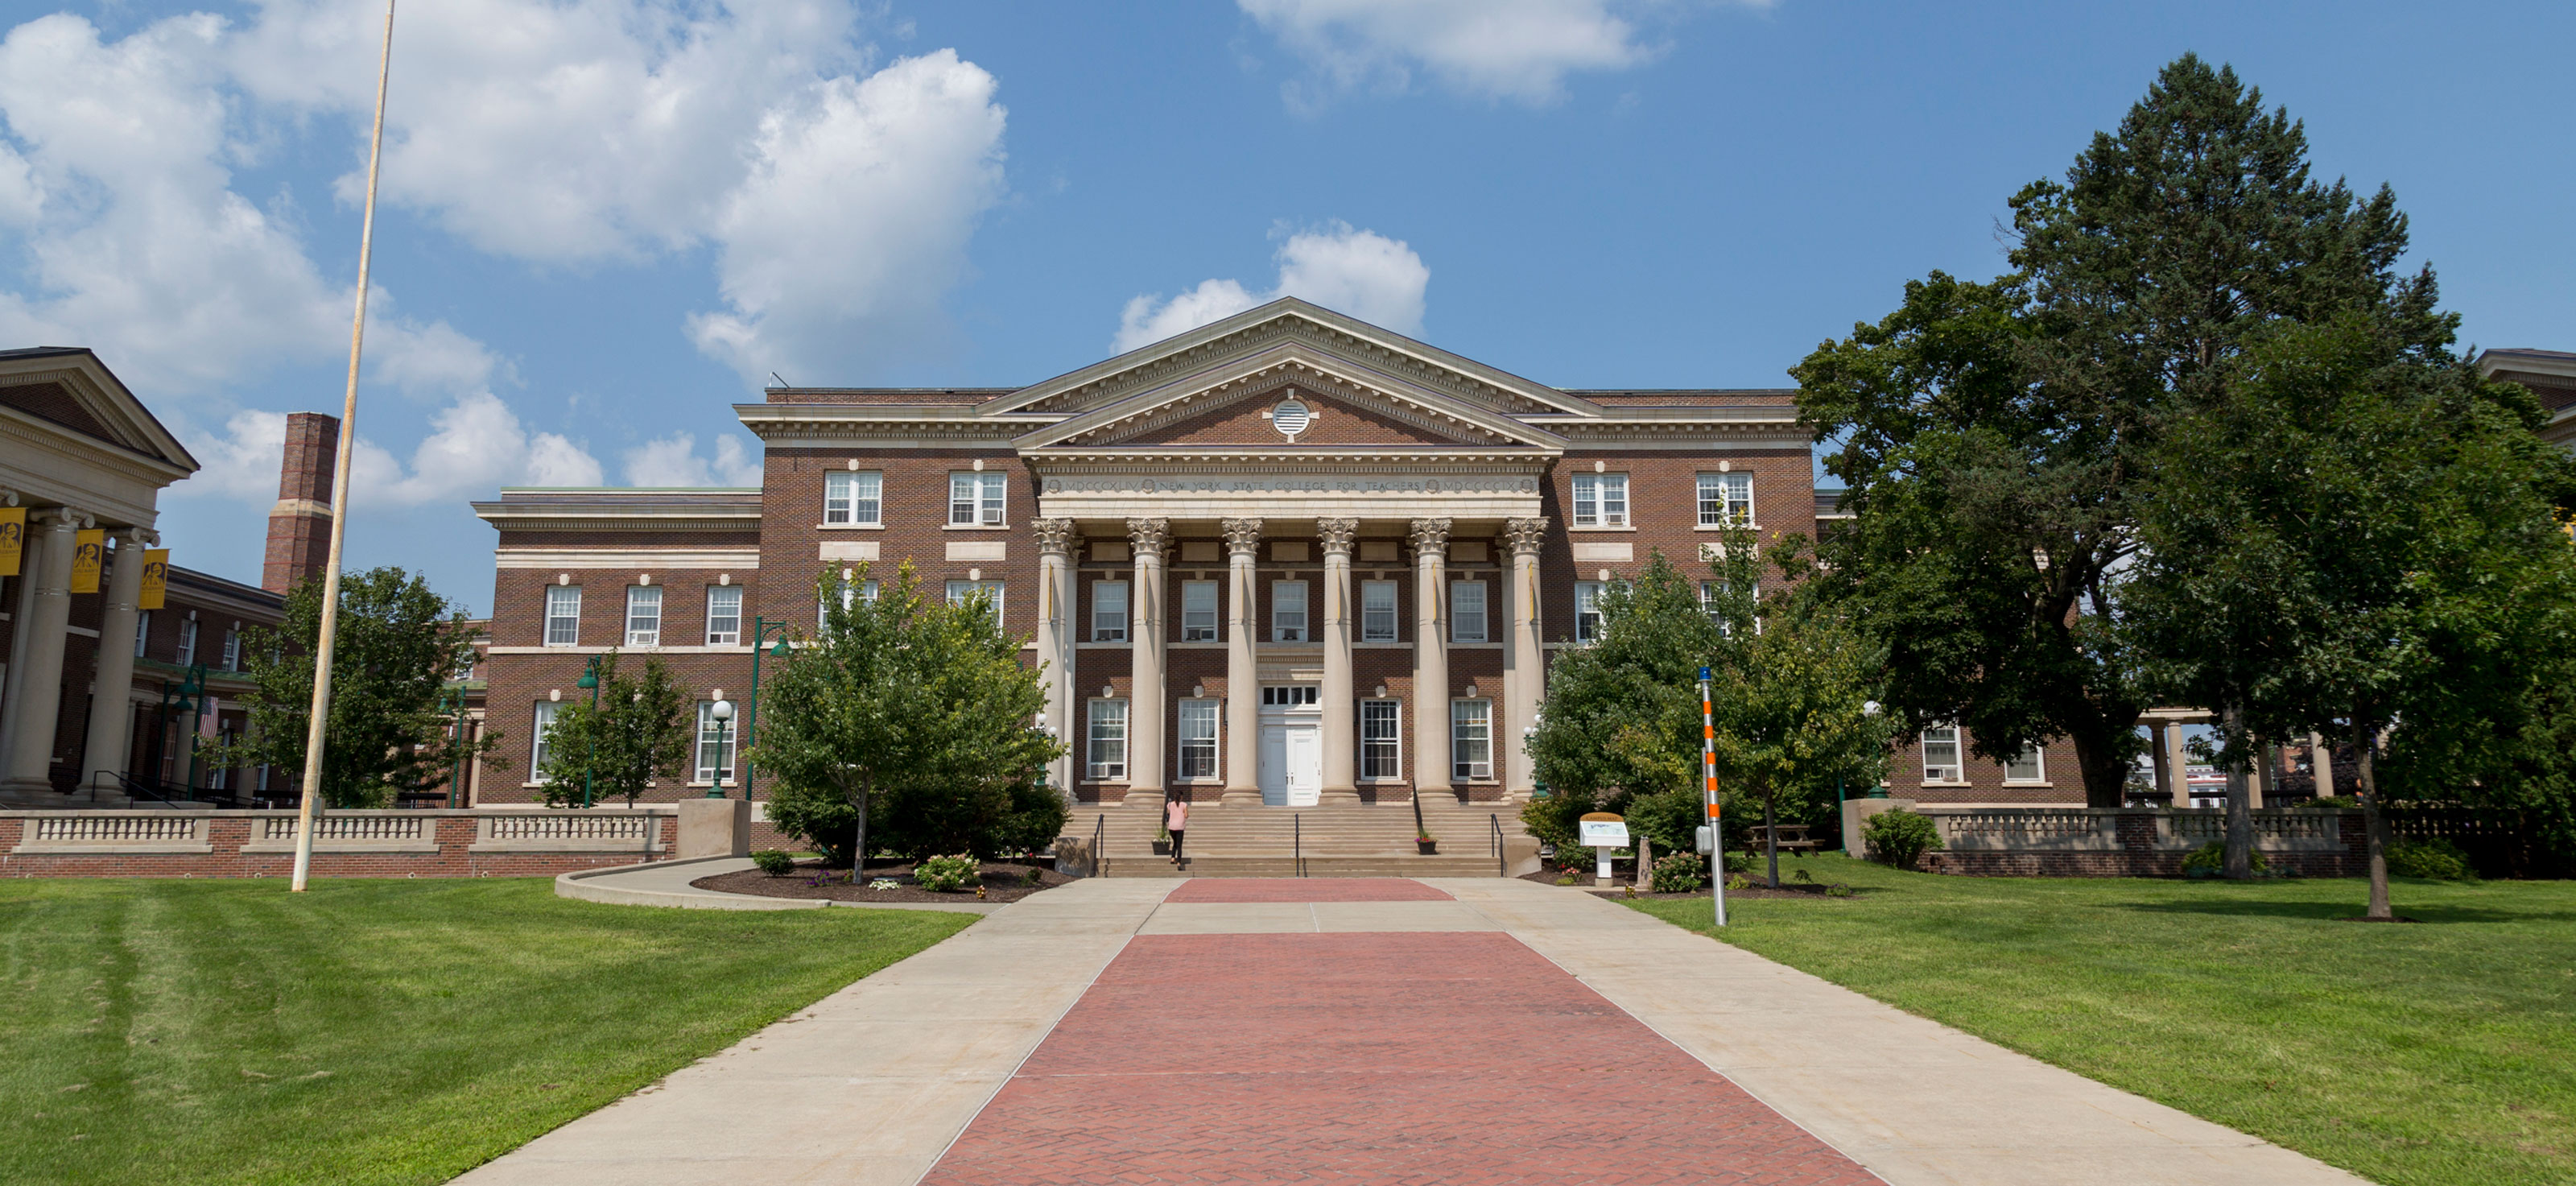 A brick Downtown Campus building with six tall columns and a brick walkway on a sunny day.